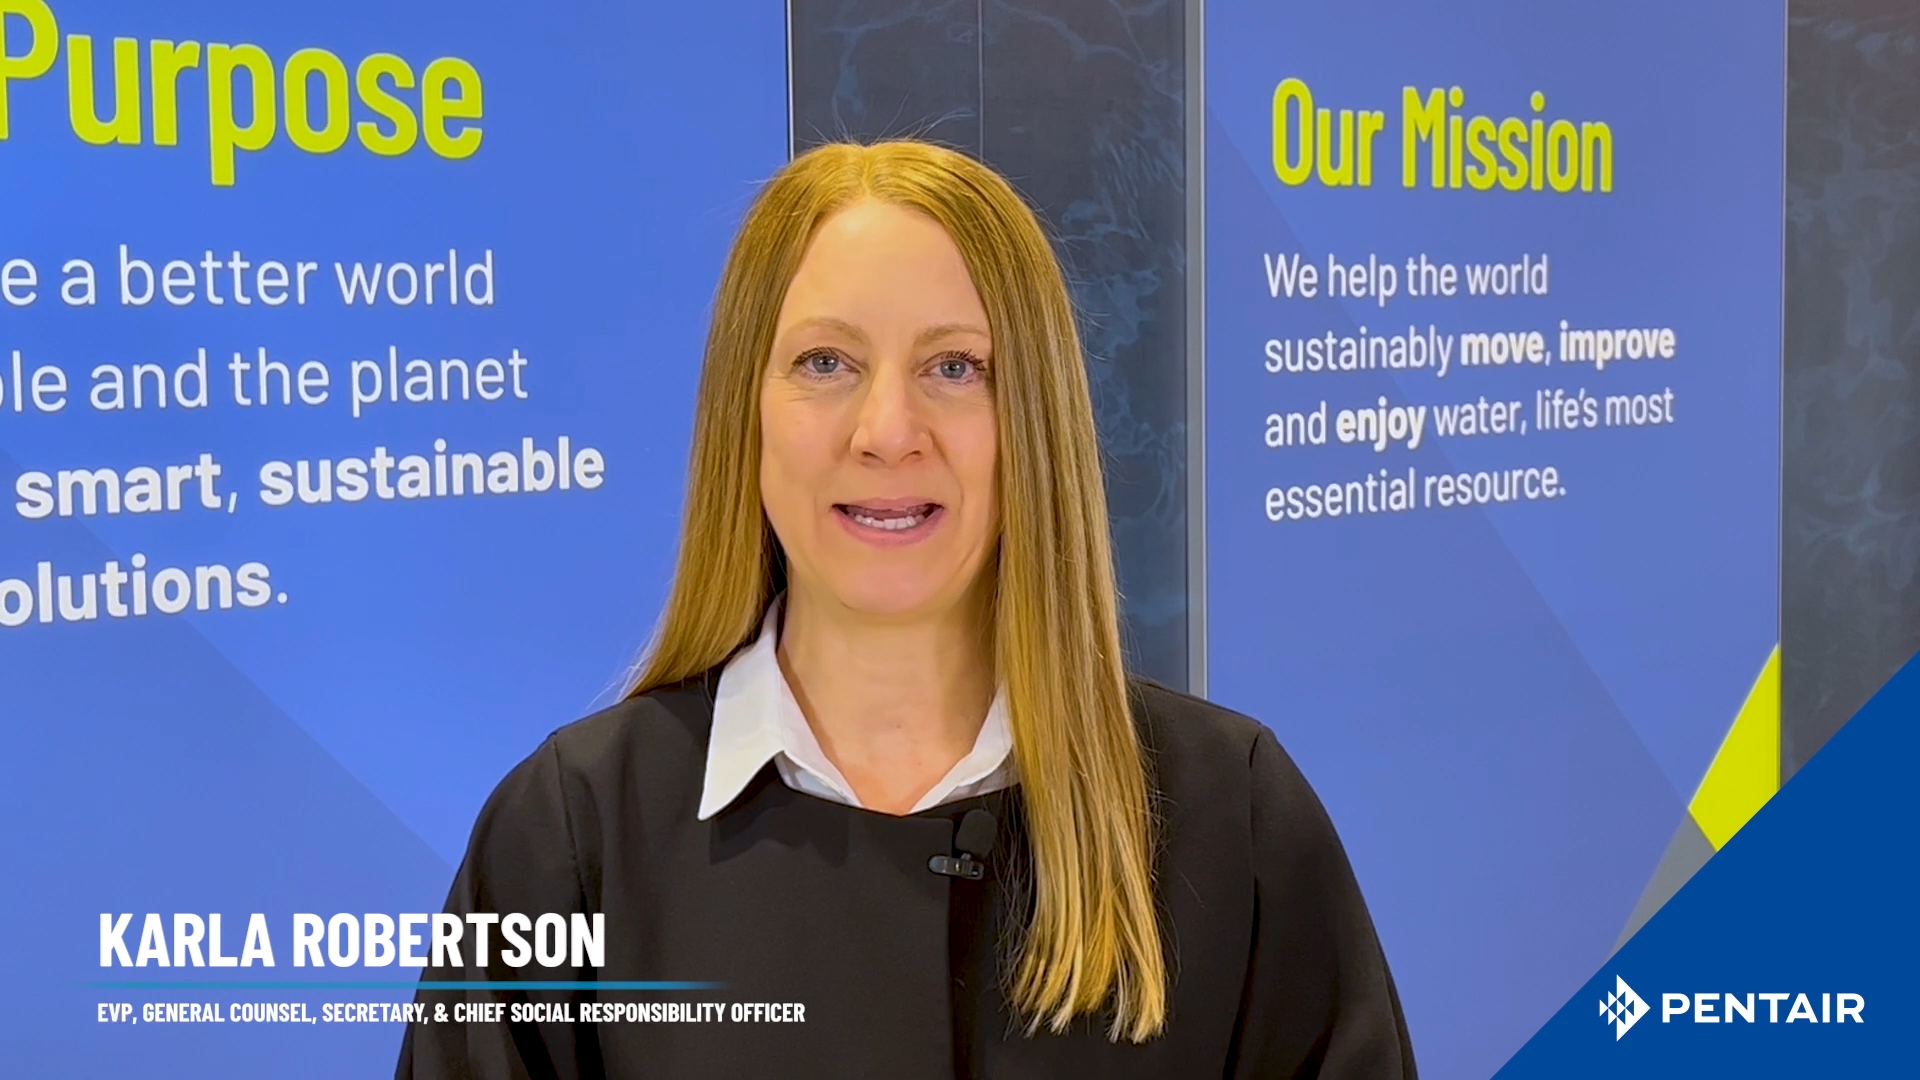 Karla Robertson shares how Pentair is Making Better Essential, for people and the planet.